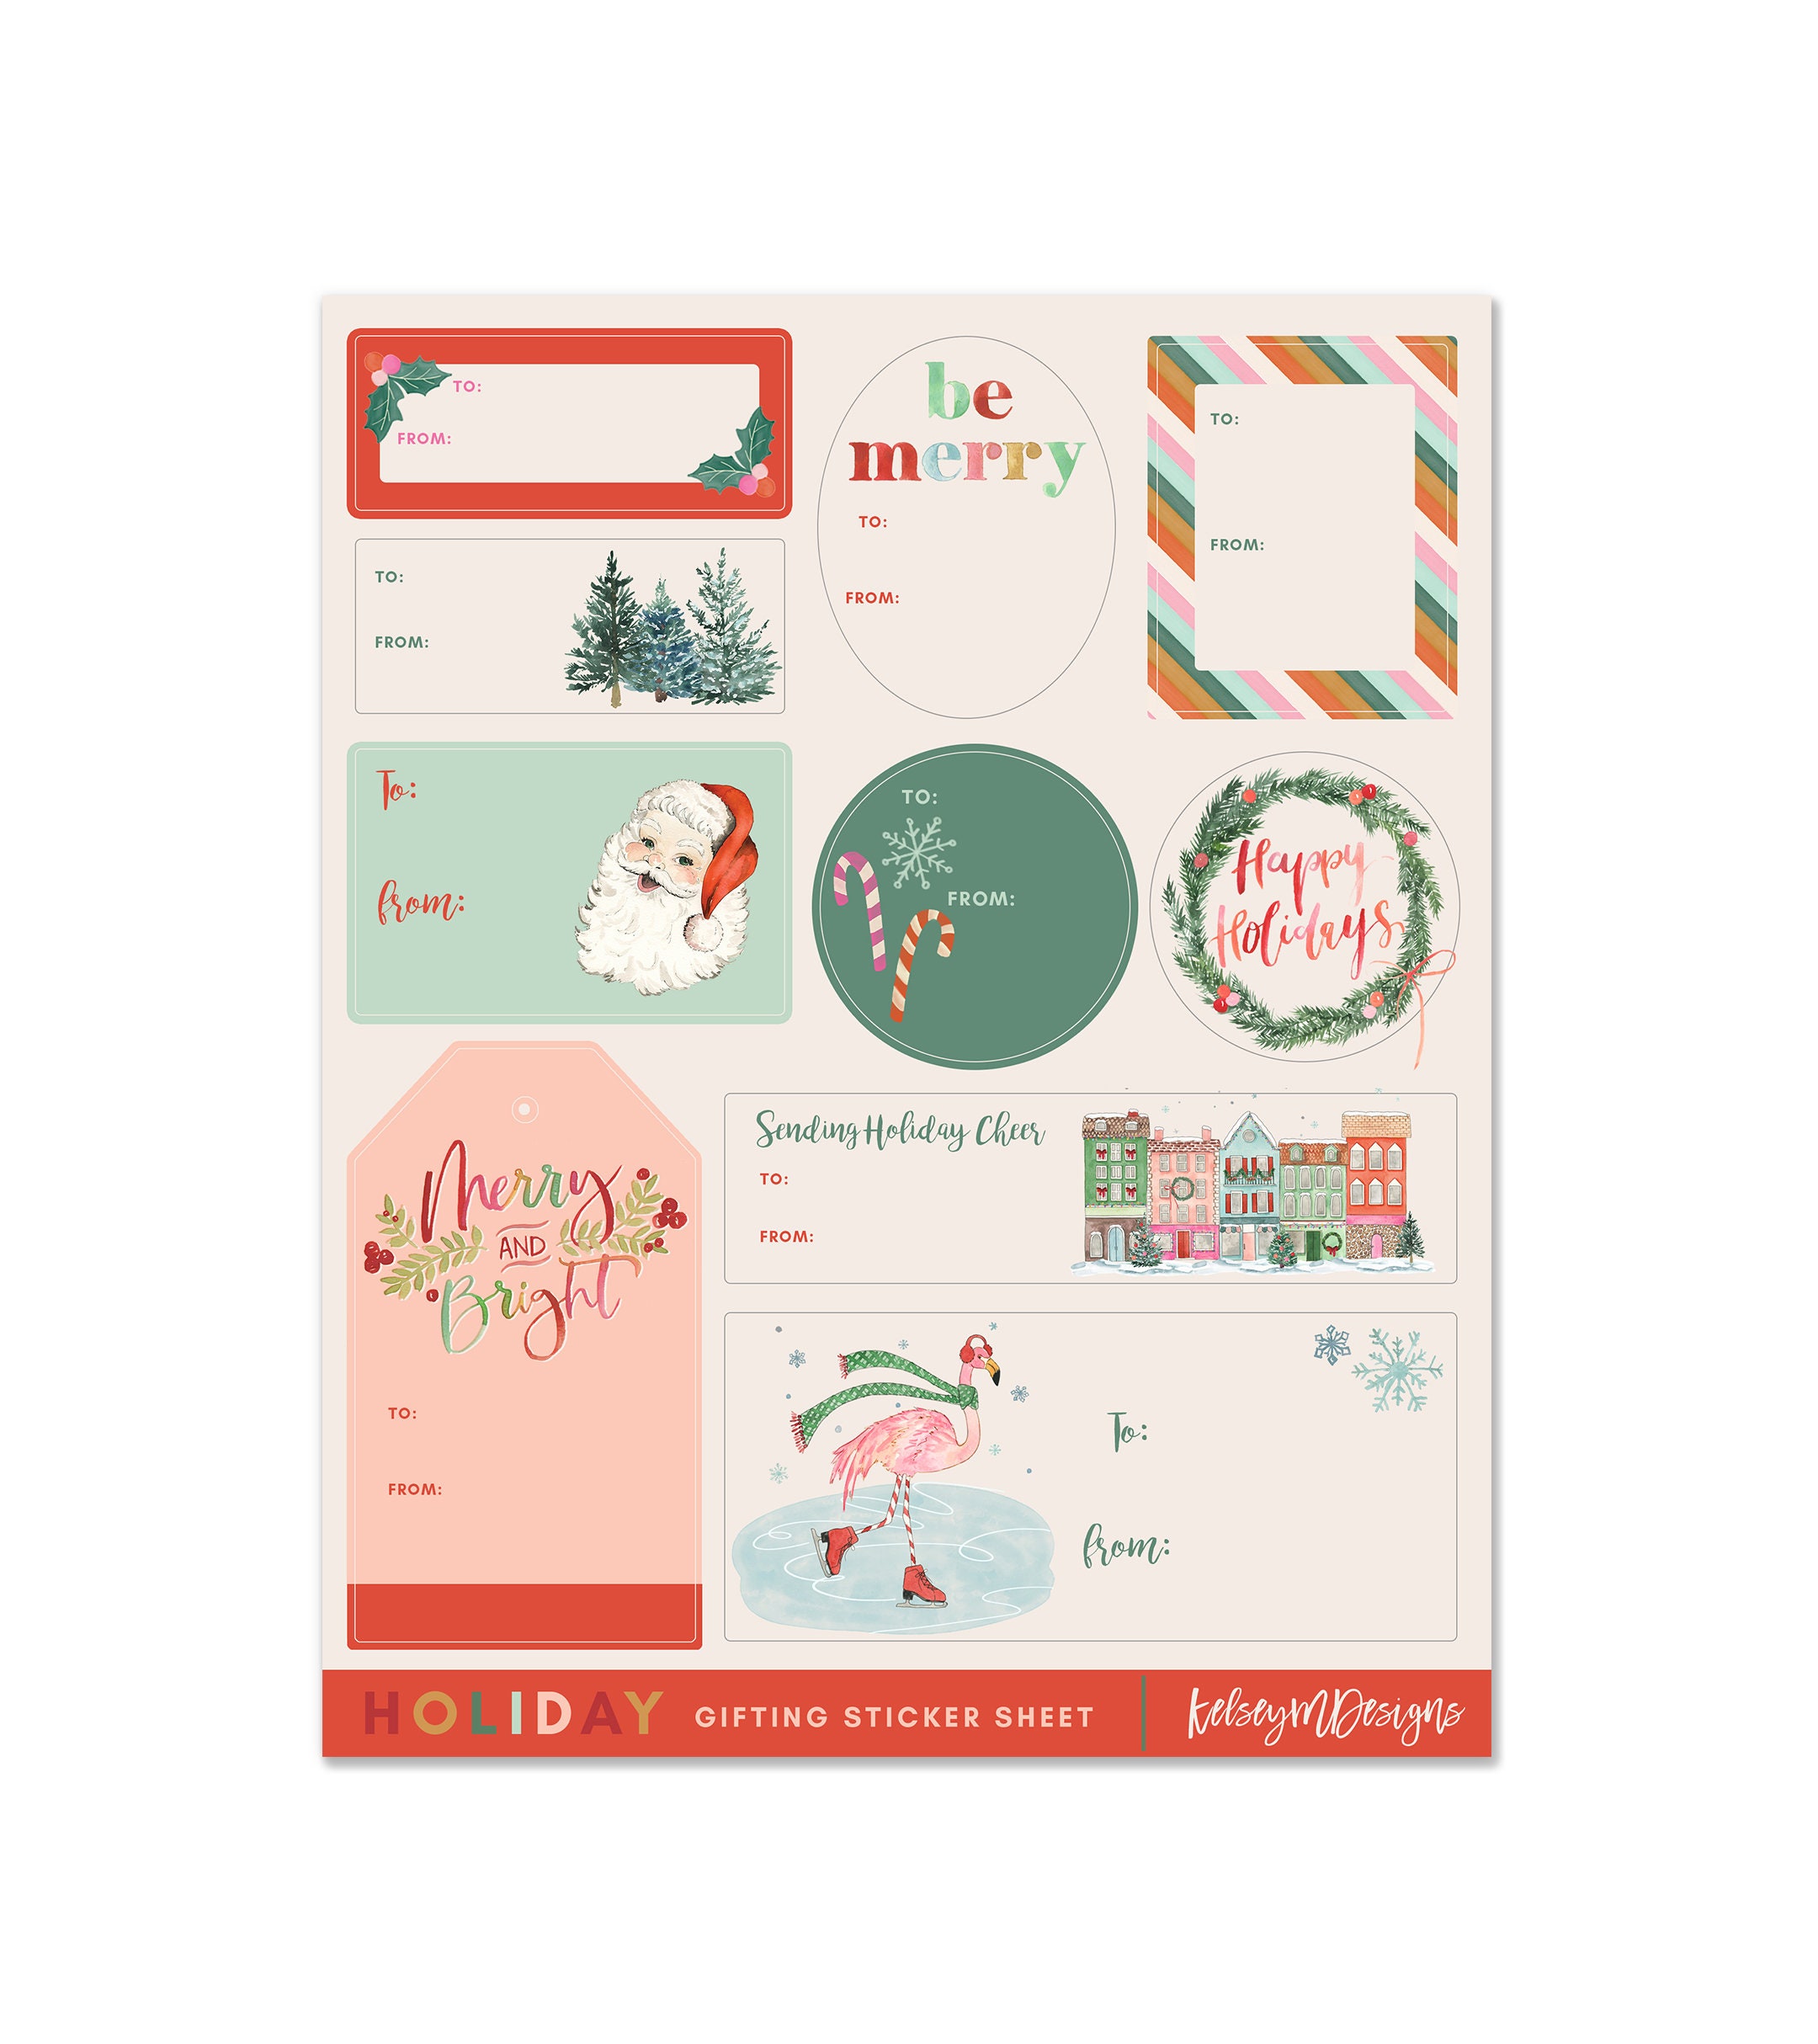 Pink Christmas Gift Stickers - Holiday Sticker Sheet – fioribelle